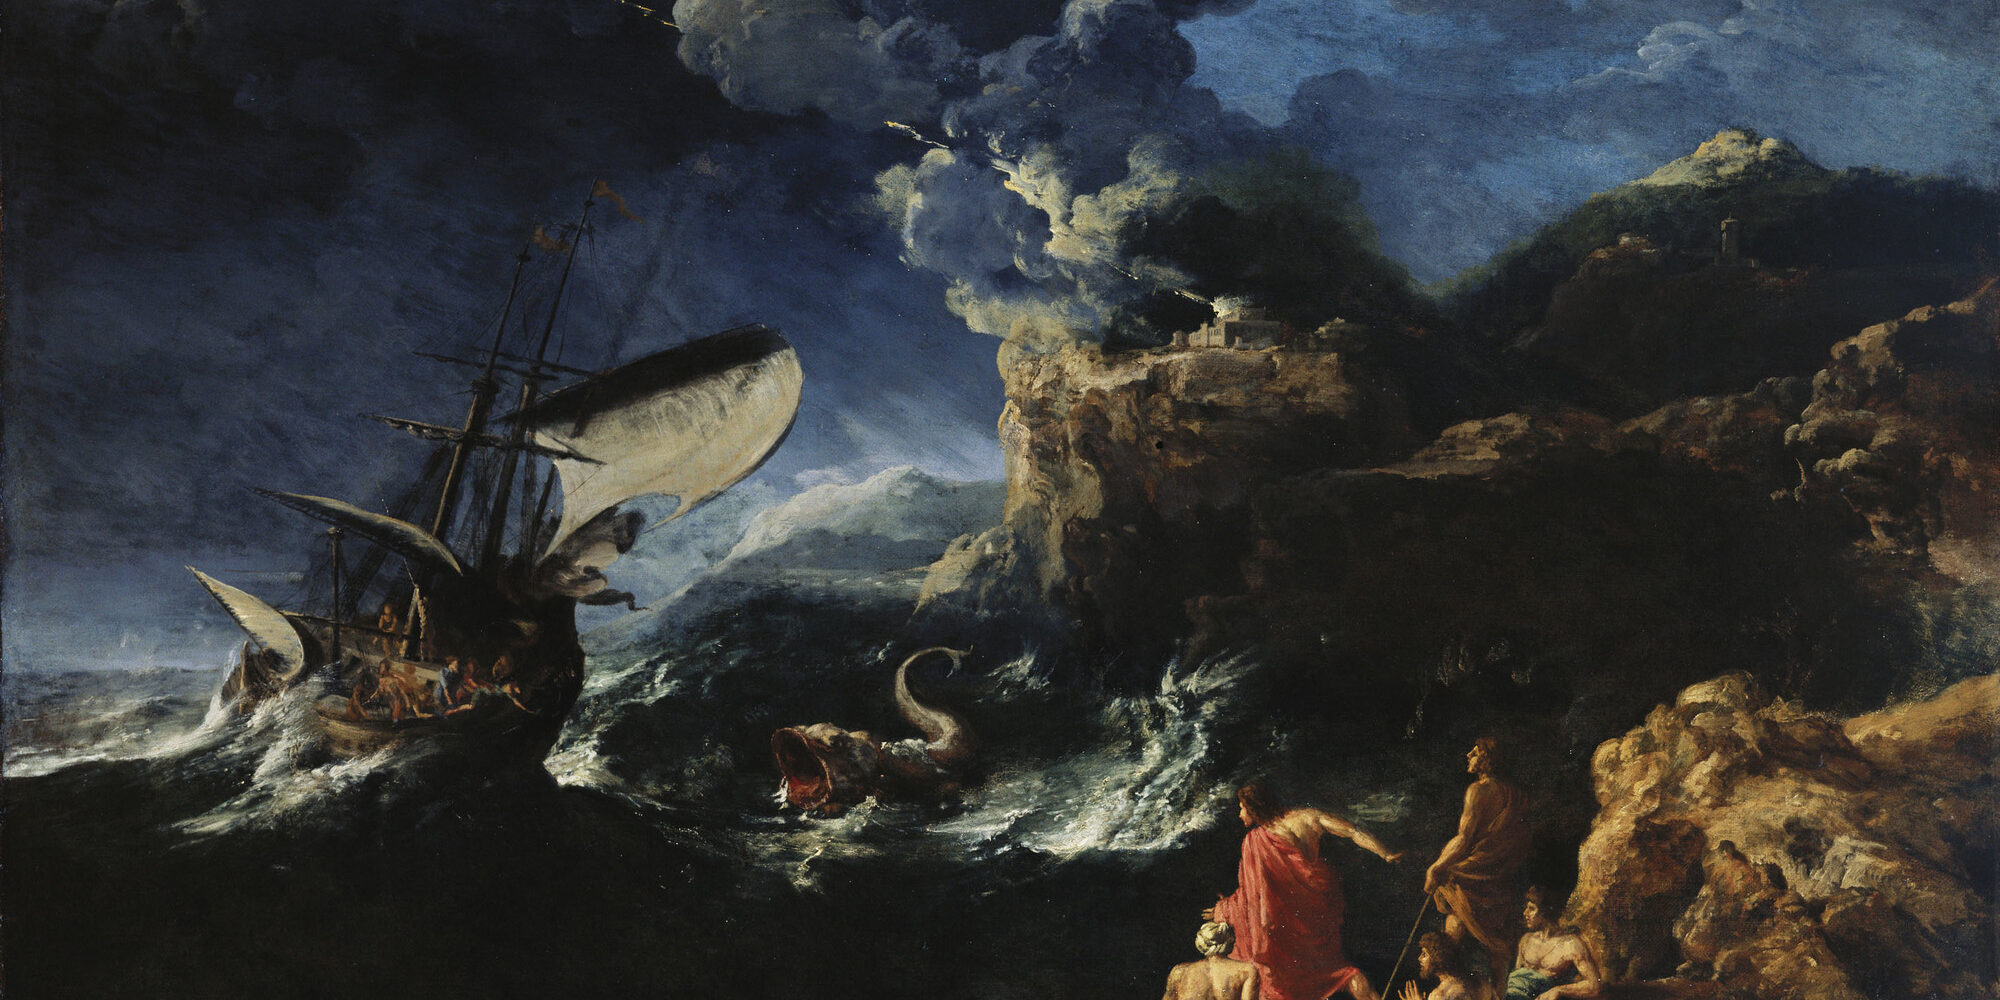 Gaspard_Dughet_(1615-75)_-_Seascape_with_Jonah_and_the_Whale_-_RCIN_405355_-_Royal_Collection